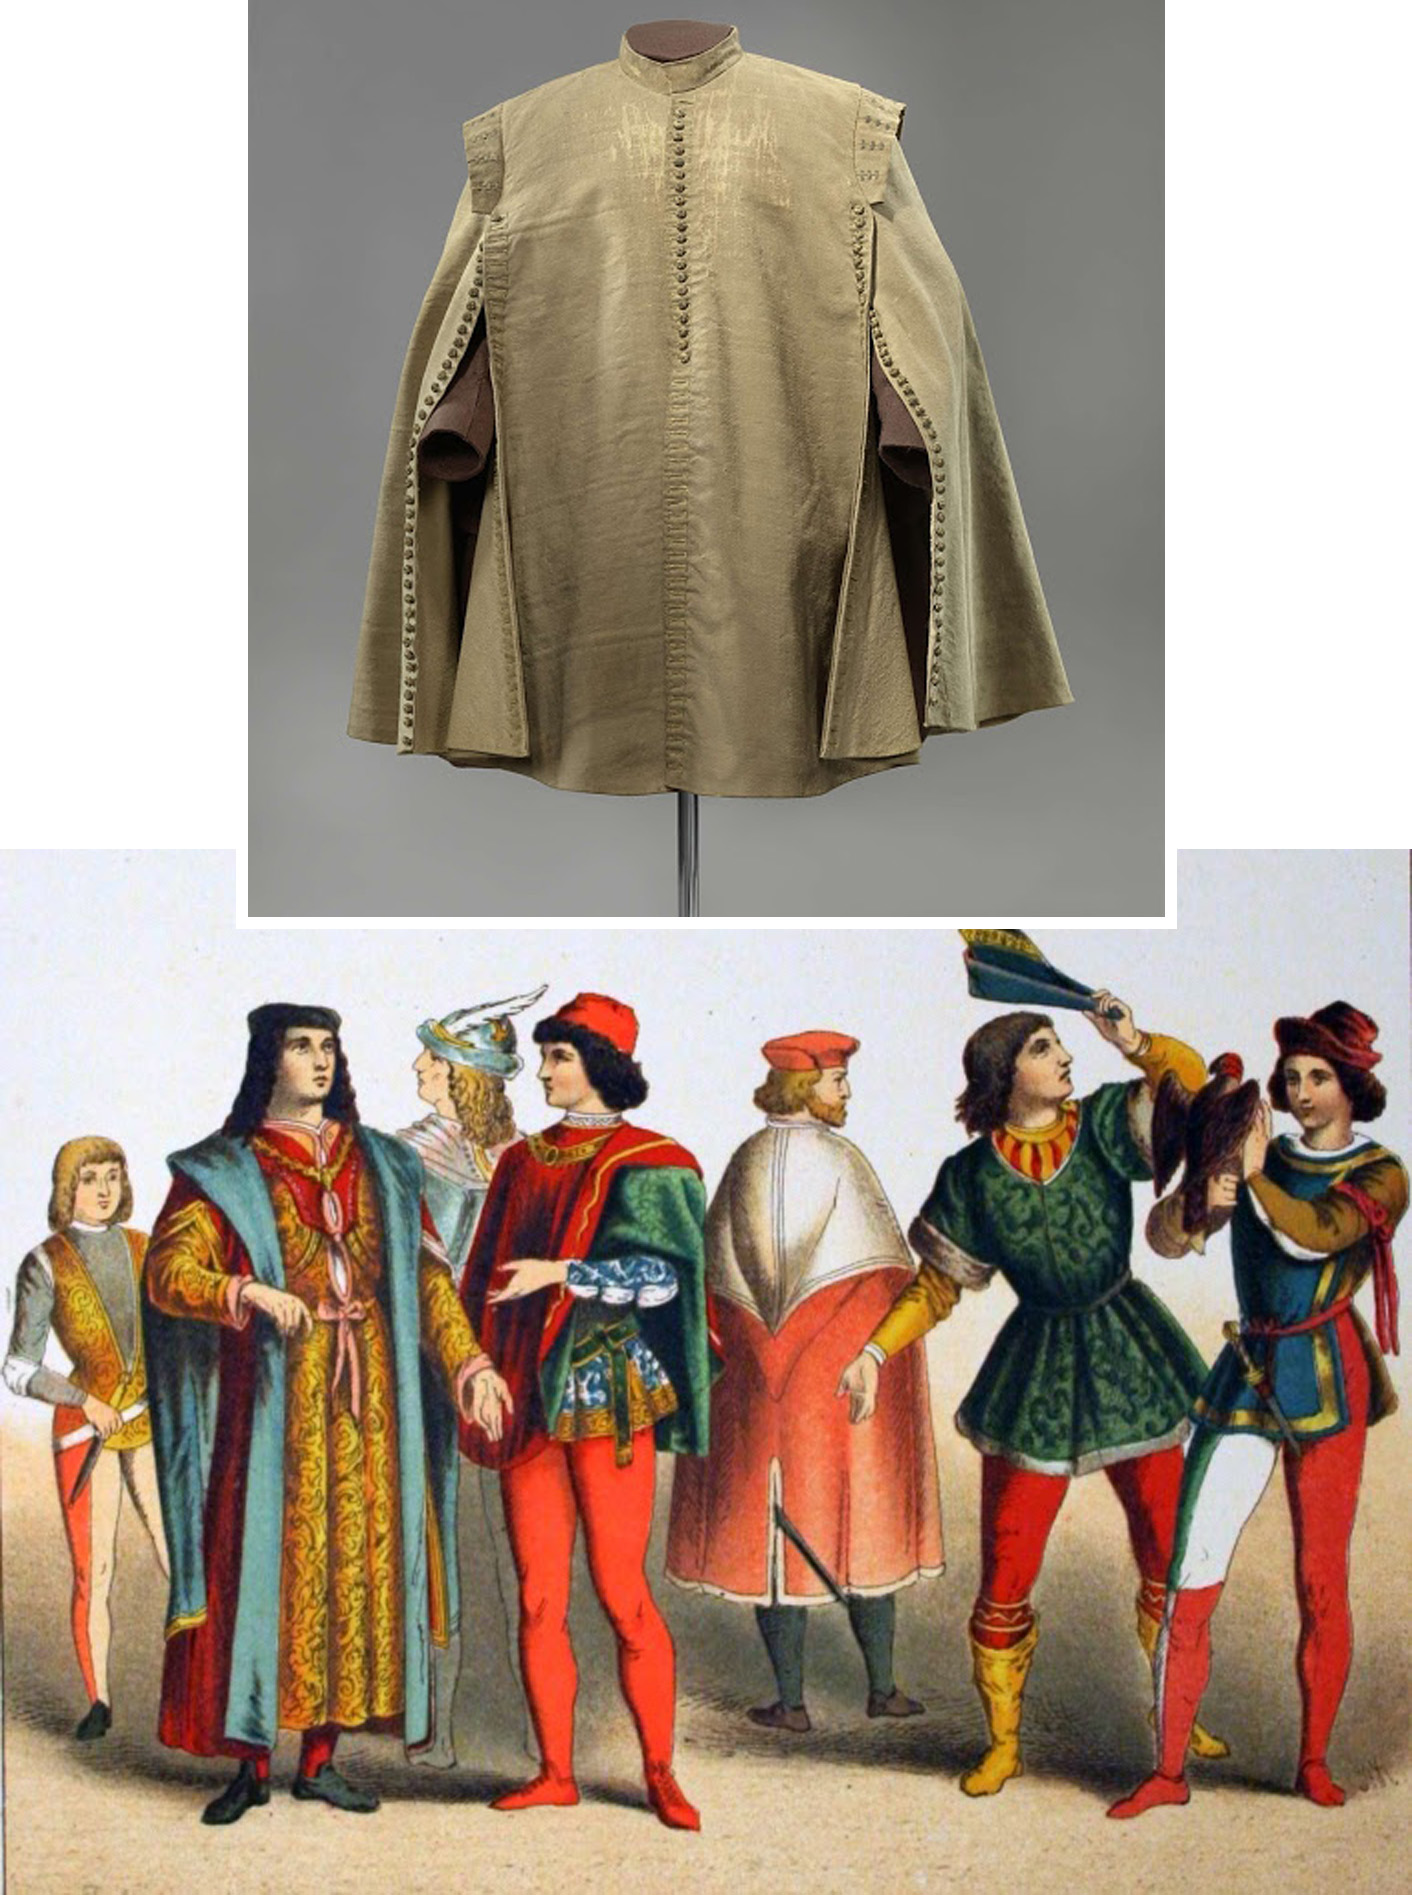 History of Capes and cloacks